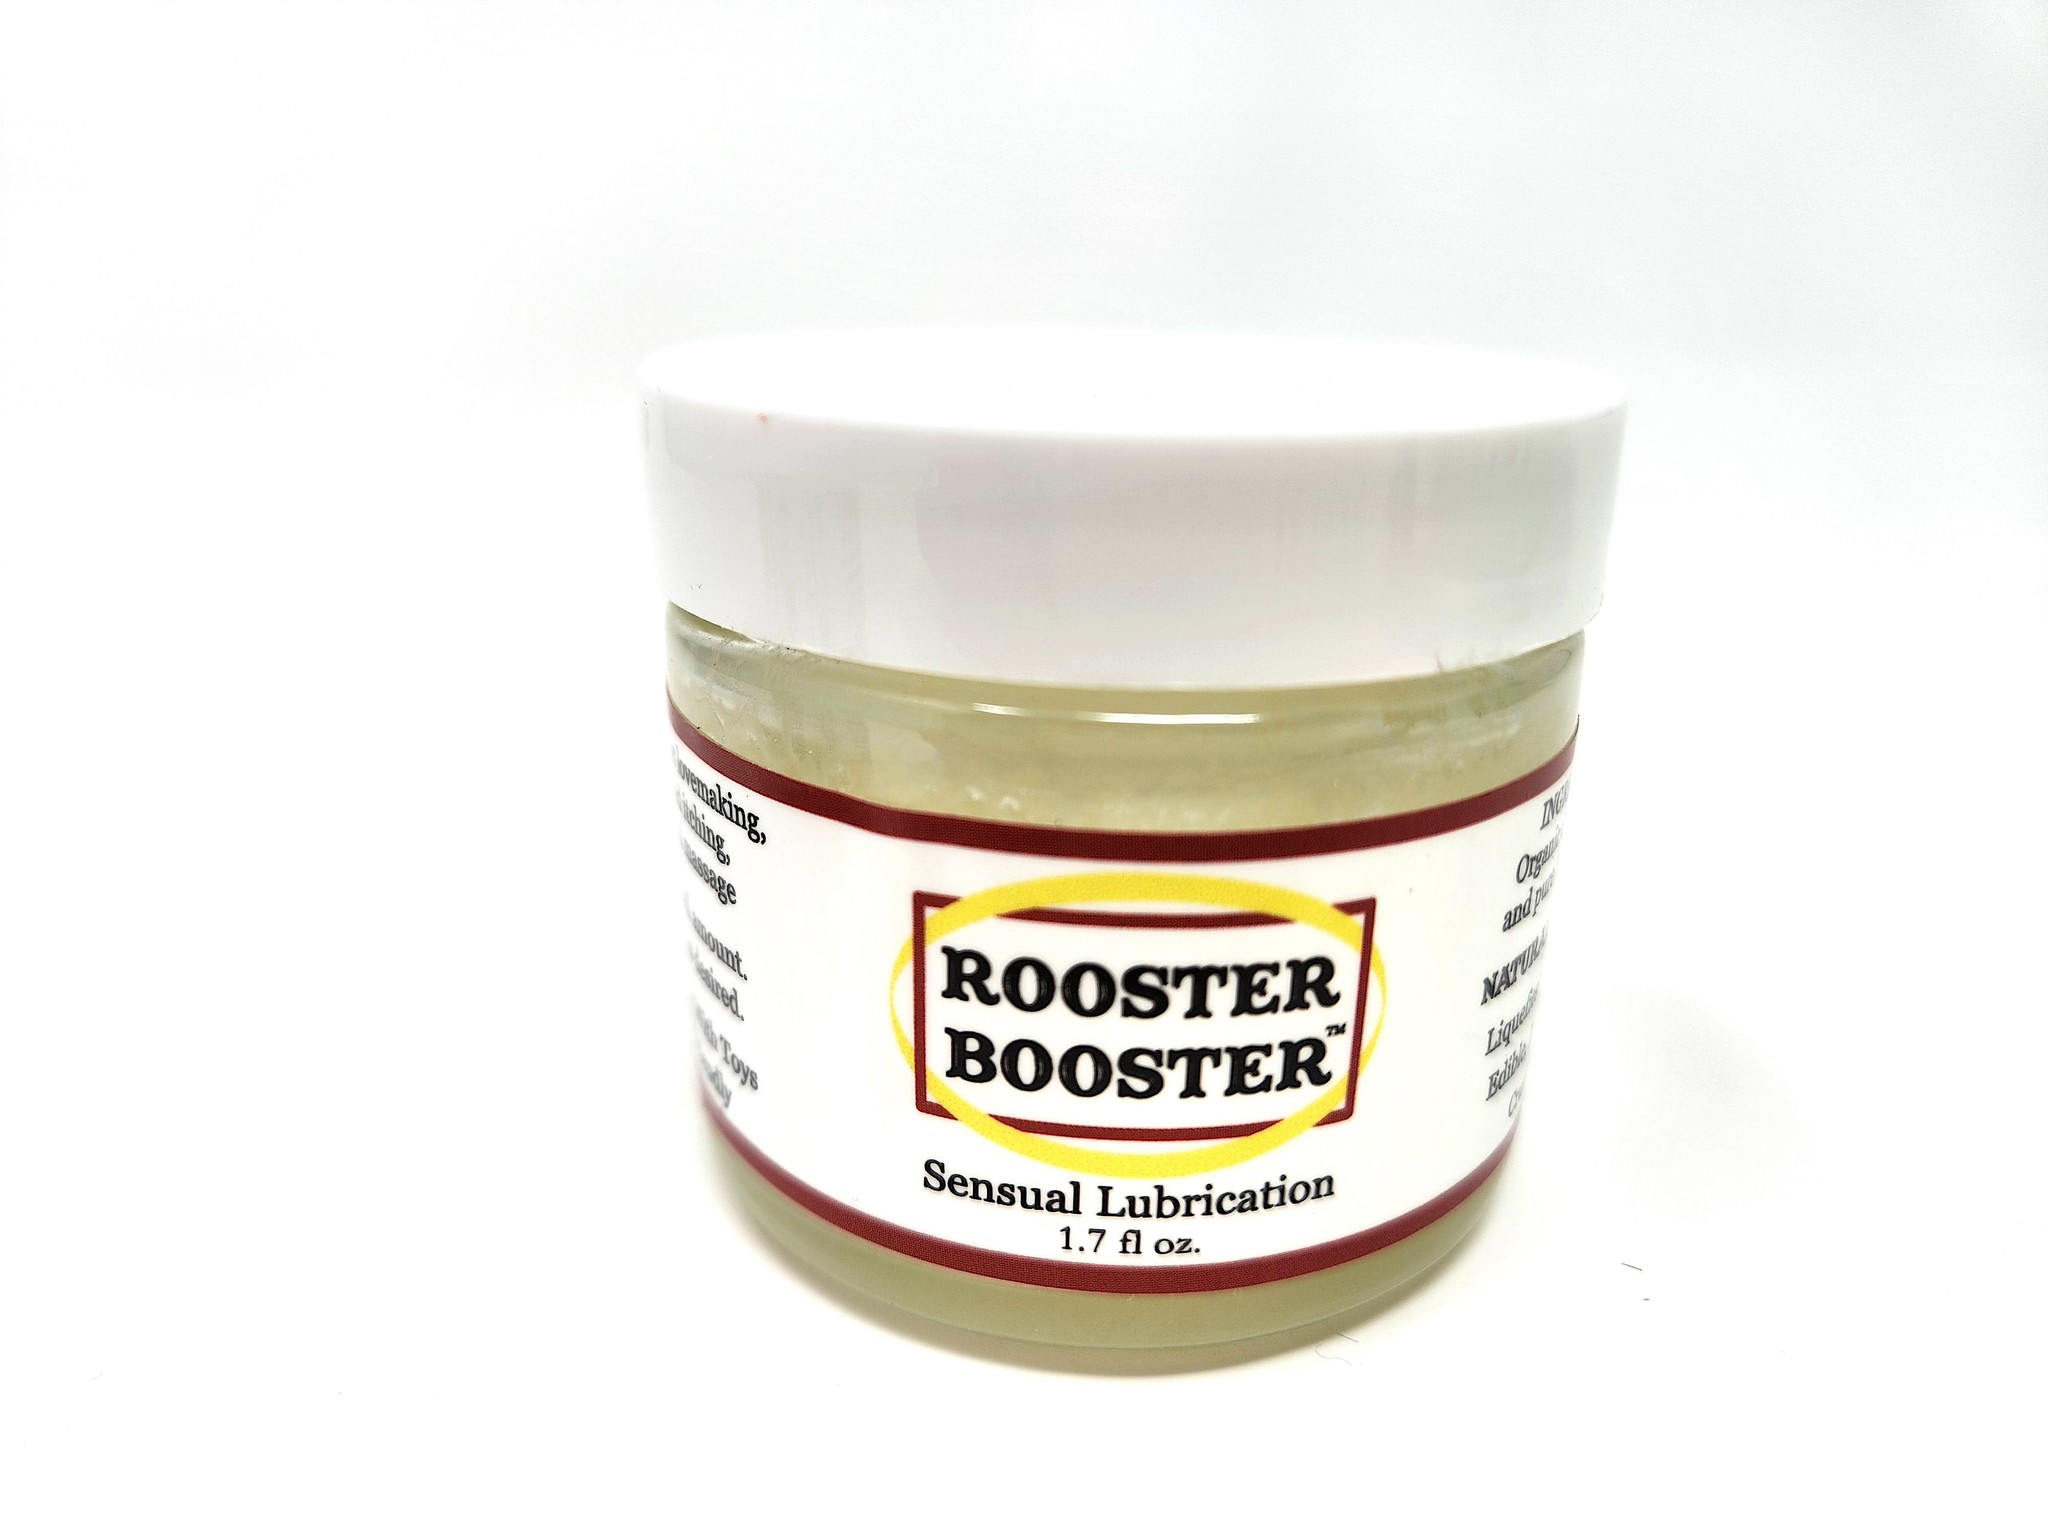 Rooster Booster - 1.7 oz.